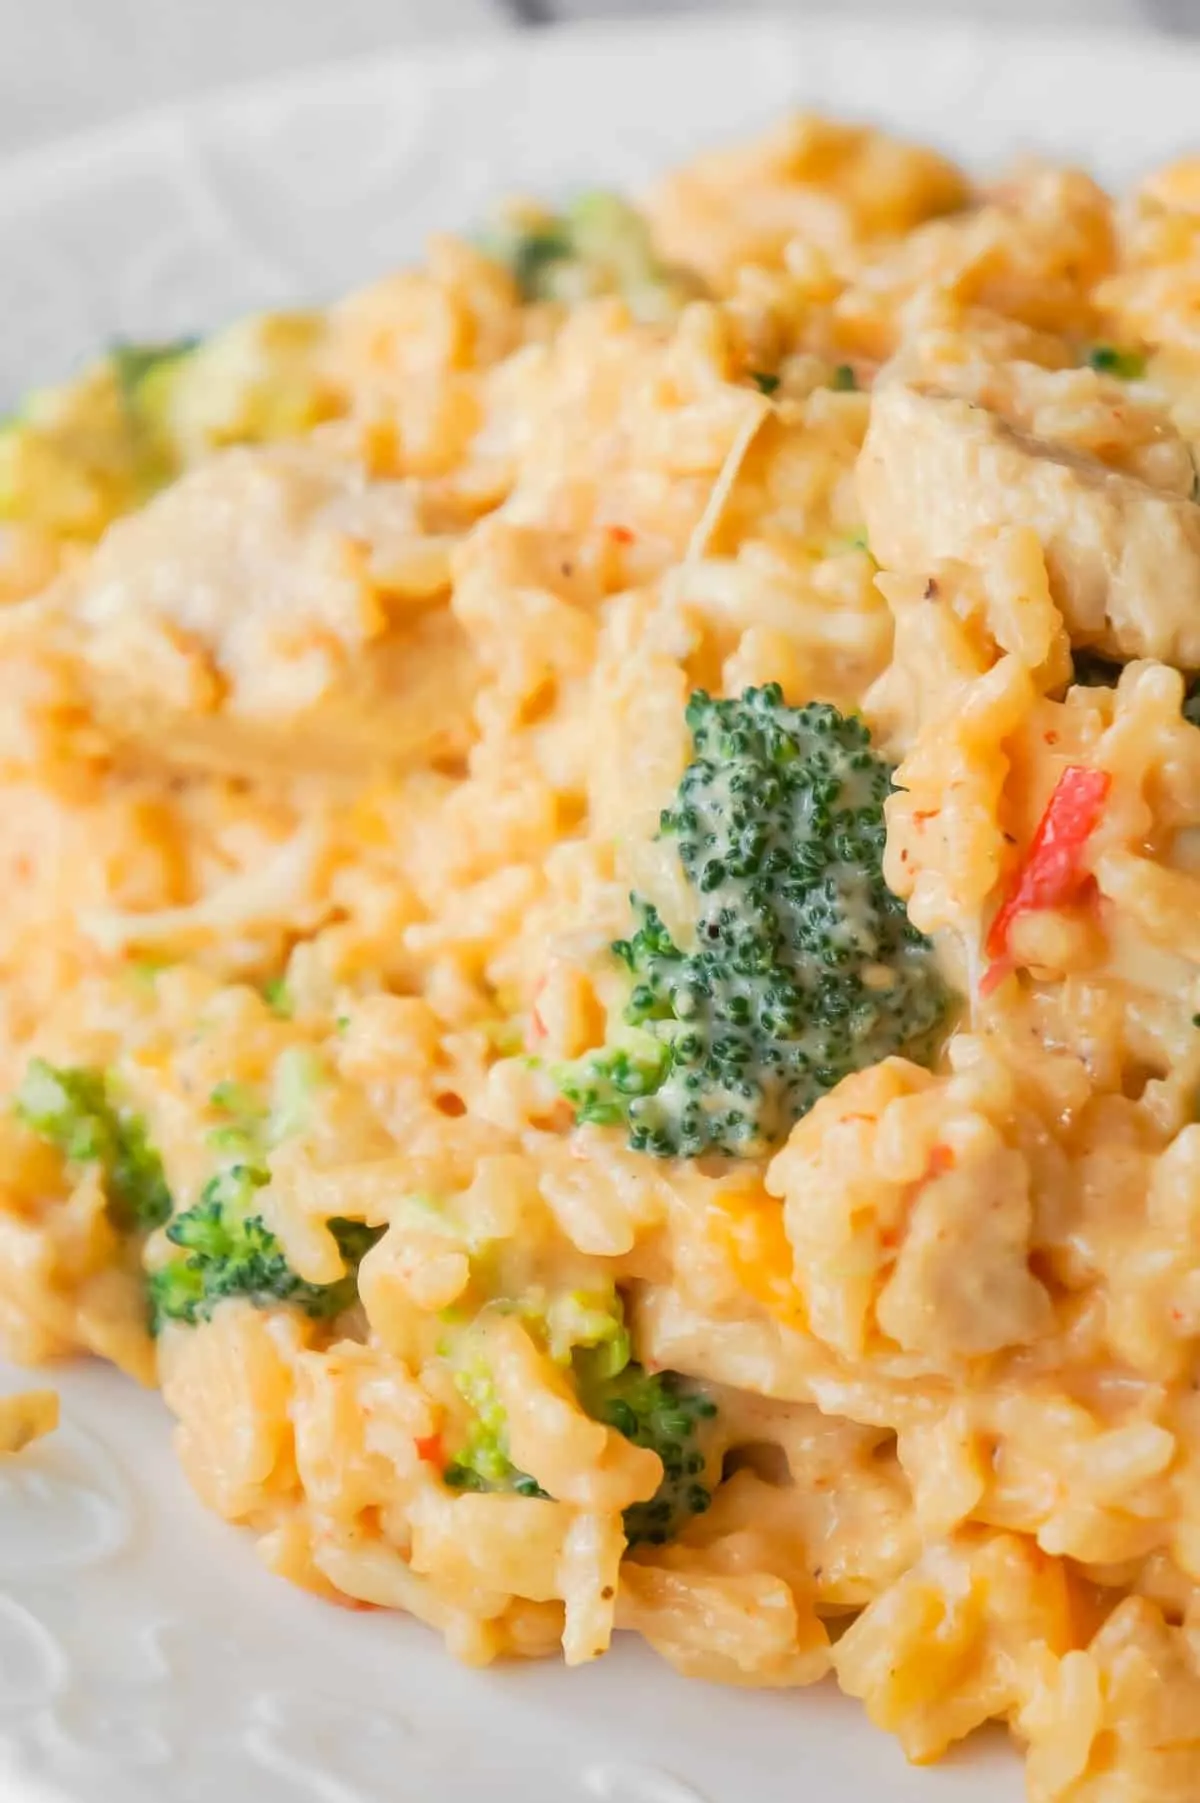 Instant Pot Cheesy Broccoli Chicken and Rice is an easy pressure cooker dinner recipe made with long grain rice and loaded with chunks of chicken breast, broccoli florets, salsa con queso, mozzarella, cheddar and Parmesan.